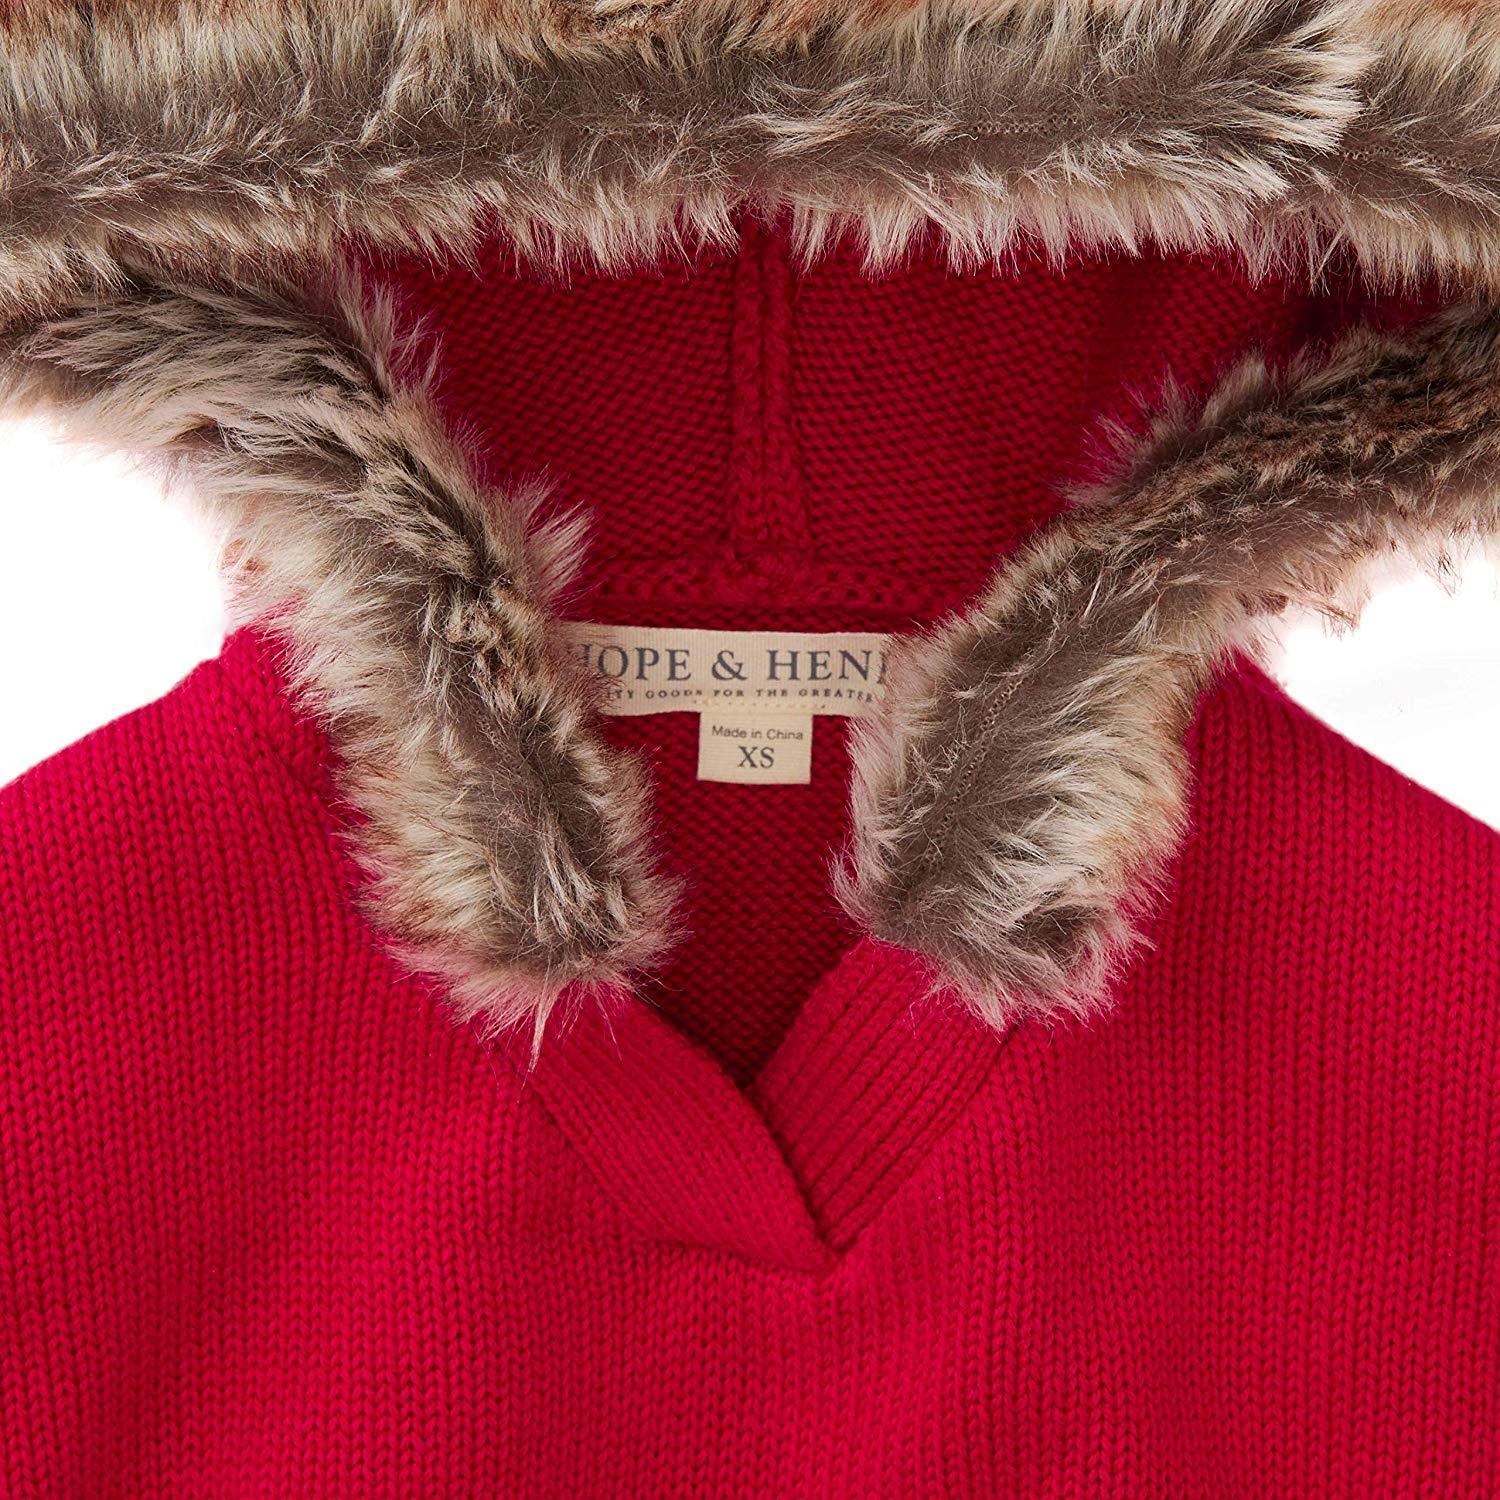 Hope & Henry Girls' Sweater Cape with Faux Fur Hood - image 2 of 3